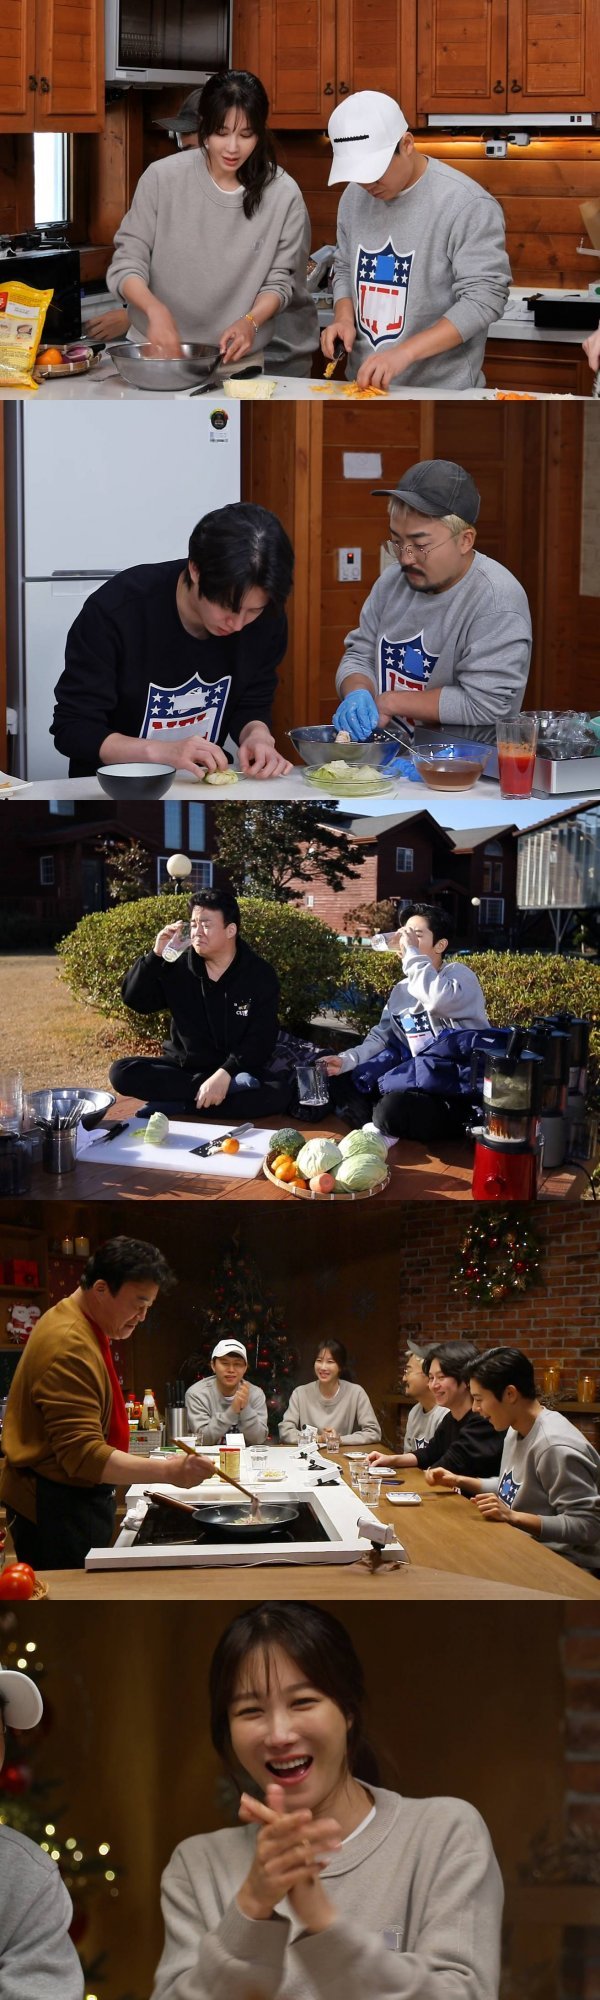 Christmas Special Feature Baekya Restaurant Lee Ji-ah, Shows Storm Foods! Separate SinB!On SBSs Matnam Square, which is broadcasted at 9 pm on the 24th (Thursday), Lee Ji-ahs simple Cabbage recipe, which captivated the taste of Nongvengers, will be released.On this day, the members played Cabbage with Lee Yong cooking Battle.Yang Se-hyeong and Yoo Byeong-jae, who have prepared the recipe, have been their assistants, starting with Lee Ji-ah and Kim Hee-chul.This Battle menu was Lee Ji-ahs Cabbage Before with waffle fans Lee Yong and Kim Hee-chuls Cabbage Dimsum which became the main chef for a long time.Yang Se-hyeong, who tasted Lee Ji-ahs Cabbage before, praised it as a new version of the bumble.Lee Ji-ahs Cabbage dish, which seemed to be indifferent, succeeded in capturing everyones appetite.Kim Dong-jun, who tasted Kim Hee-chuls Cabbage dim sum, also praised the light taste as a diet.Especially, the winning product took tangerine liquor that appeared on the Jeju Island side of Matnam Square a year ago.With special products, more sparkling competition is expected, and it raises the question of who will win the Jeju Island tangerine drink.Meanwhile, Baek Jong-won and Kim Dong-jun made juice using Jeju Island specialties.Unlike the one flavored juice made by region until now, this time, we used six vegetables that have difficulties such as overproduction and typhoon damage.This is Cabbage, citrus, broccoli, beet, colabi, and carrots, and the two named the six vegetables six hundred juices.The two men who had tasted six hundred and sixty-one juices for the first time frowned on the bitterness, but added citrus to sweeten them and added the red color of the beats to create six hundred juices that made use of the charm of the ingredients.You can check the six hundred and sixty juice recipe that becomes healthy just by looking at it.The Bag Night Restaurant, which was decorated with Christmas specials, was opened, and the year-end atmosphere was created with photos and sparkling trees to look back on memories of the year.The owner, Baek Jong-won, presented a recipe using Cabbage from a special day, a set of three kinds of Cabbage fried to street toast.Lee Ji-ah was surprised to see the taste that he ate at China, and Kim Dong-jun also commented that he thought about it when he was working at China.Lee Ji-ah, who did not stop at the course, smiled and fell into a food trip.Unlike SinBs image, she was spreading storm food, and she said that she eats all the red fish and tofu without eating.Lee Ji-ah showed a perfect adaptation to the brilliant work skill of Baek Jong-won, shouting Good shot! Nice shot!The Cabbage recipe and Lee Ji-ahs anti-war charm, which can only be enjoyed at Baekya Restaurant, can be found on SBSs Matnam Square, which is broadcasted at 9 pm on the 24th (Thursday).